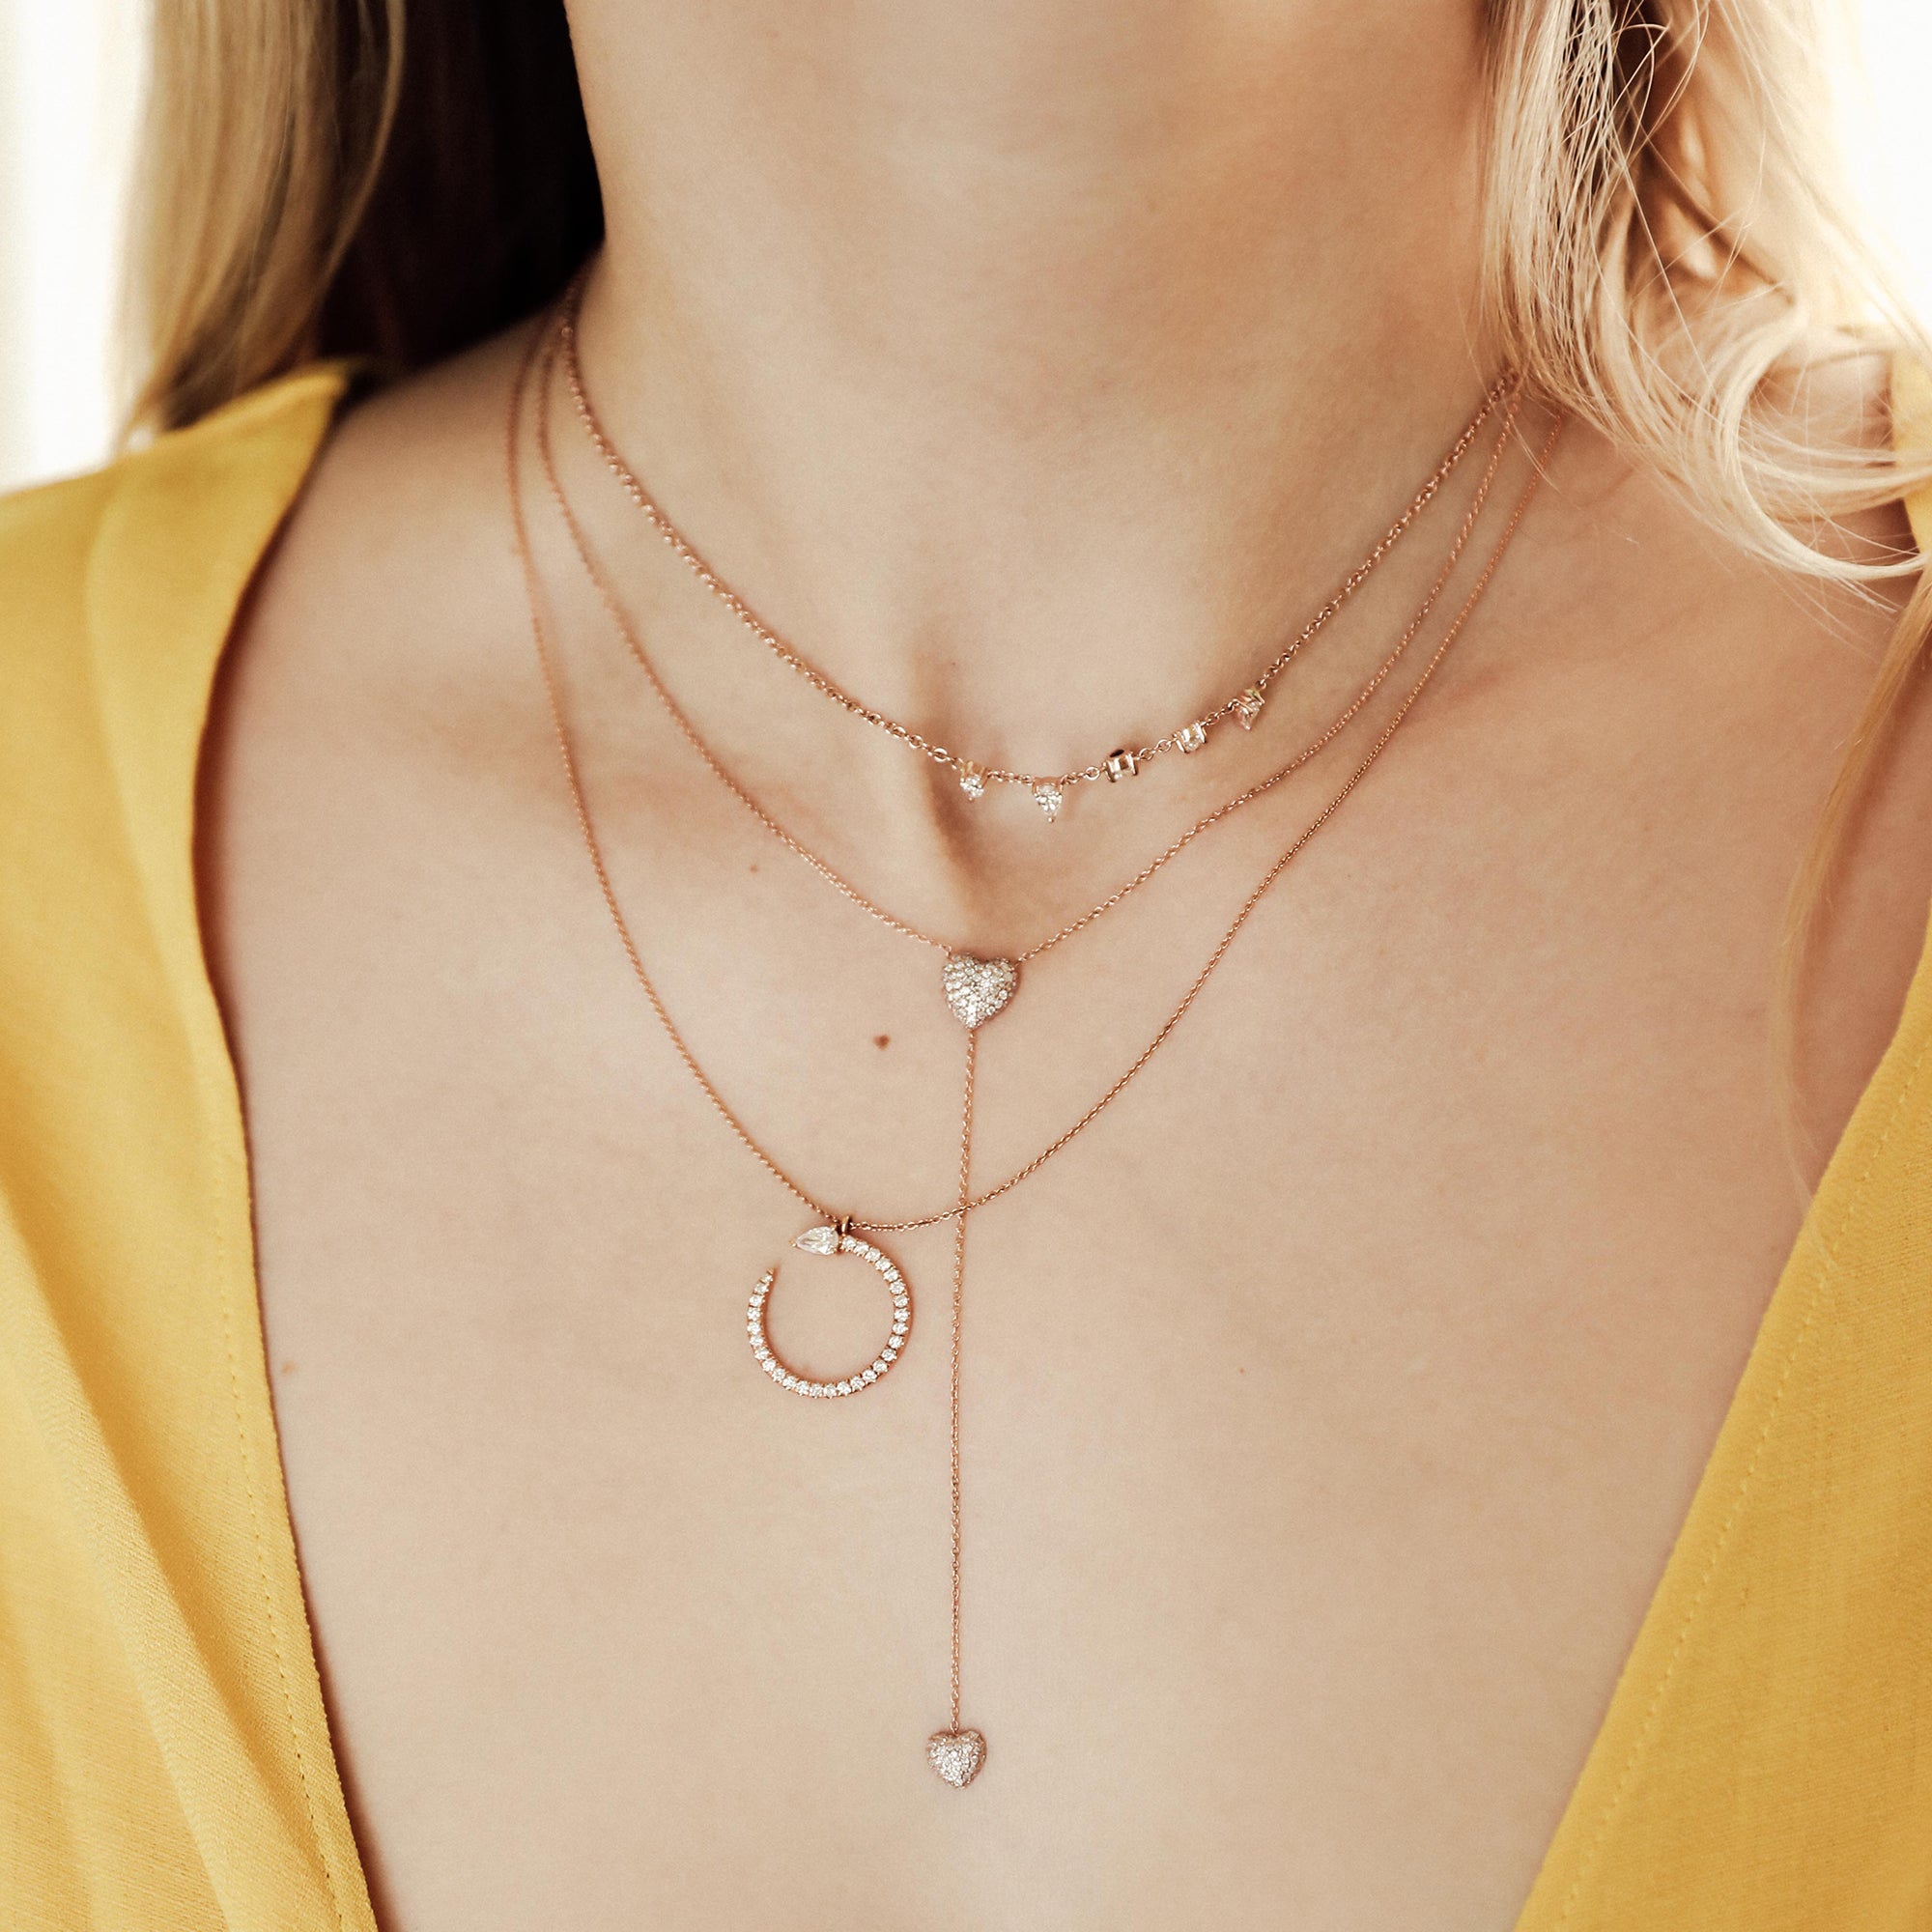 The Sweetheart Lariat in rose gold shown with the Serpent Necklace